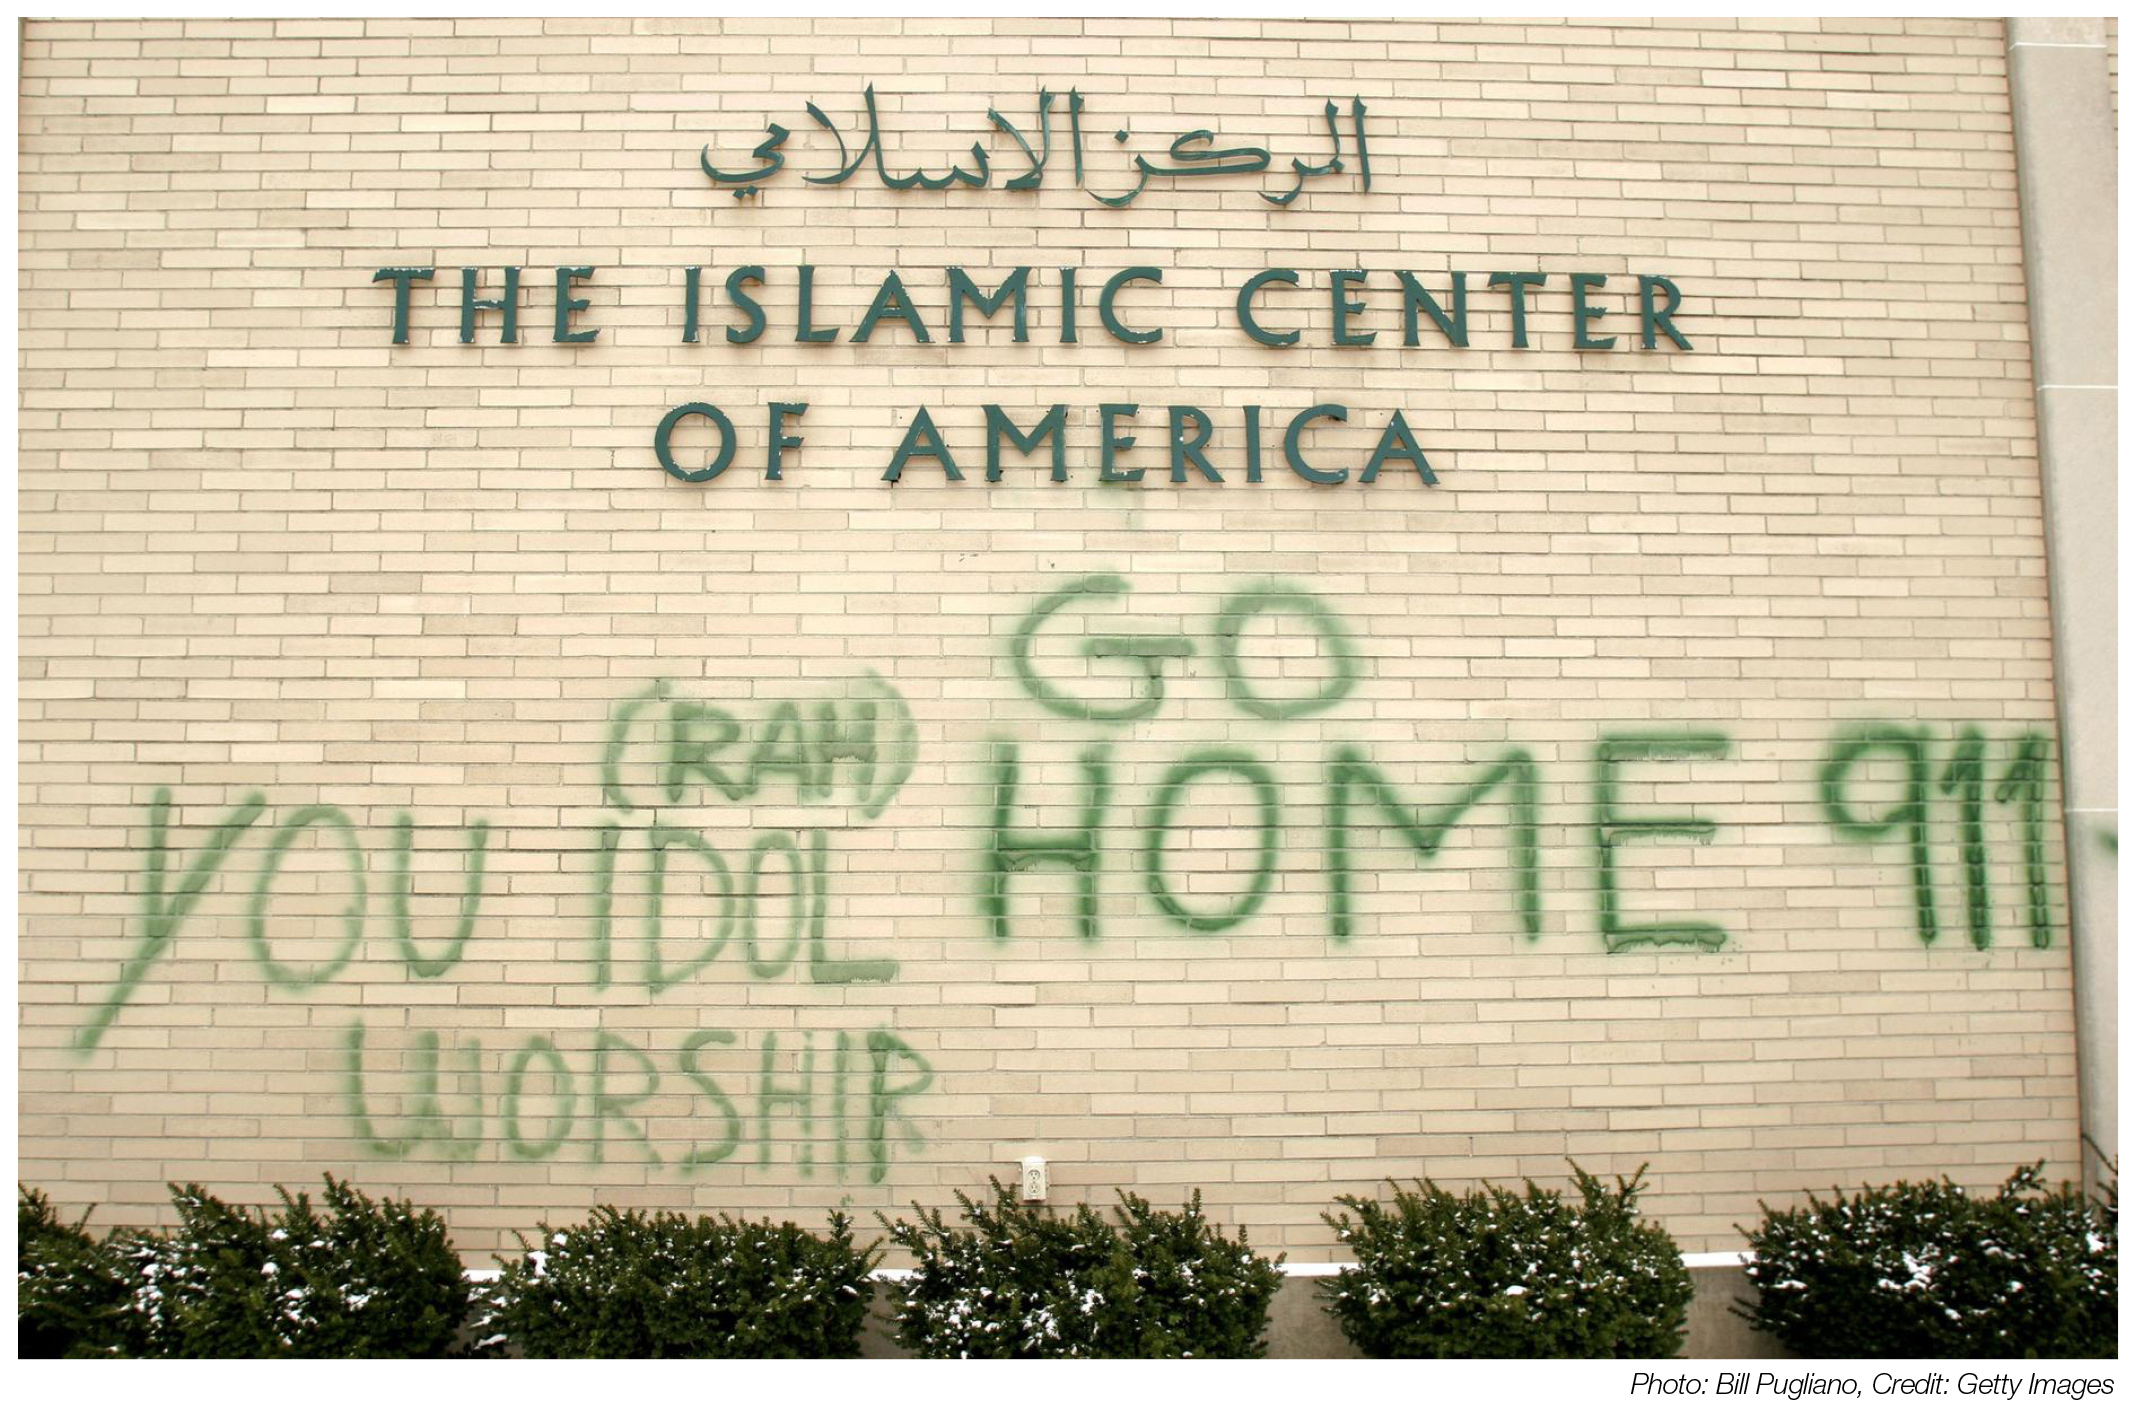 Exterior wall of the Islamic Center of America with antagonizing green graffiti sprayed below.